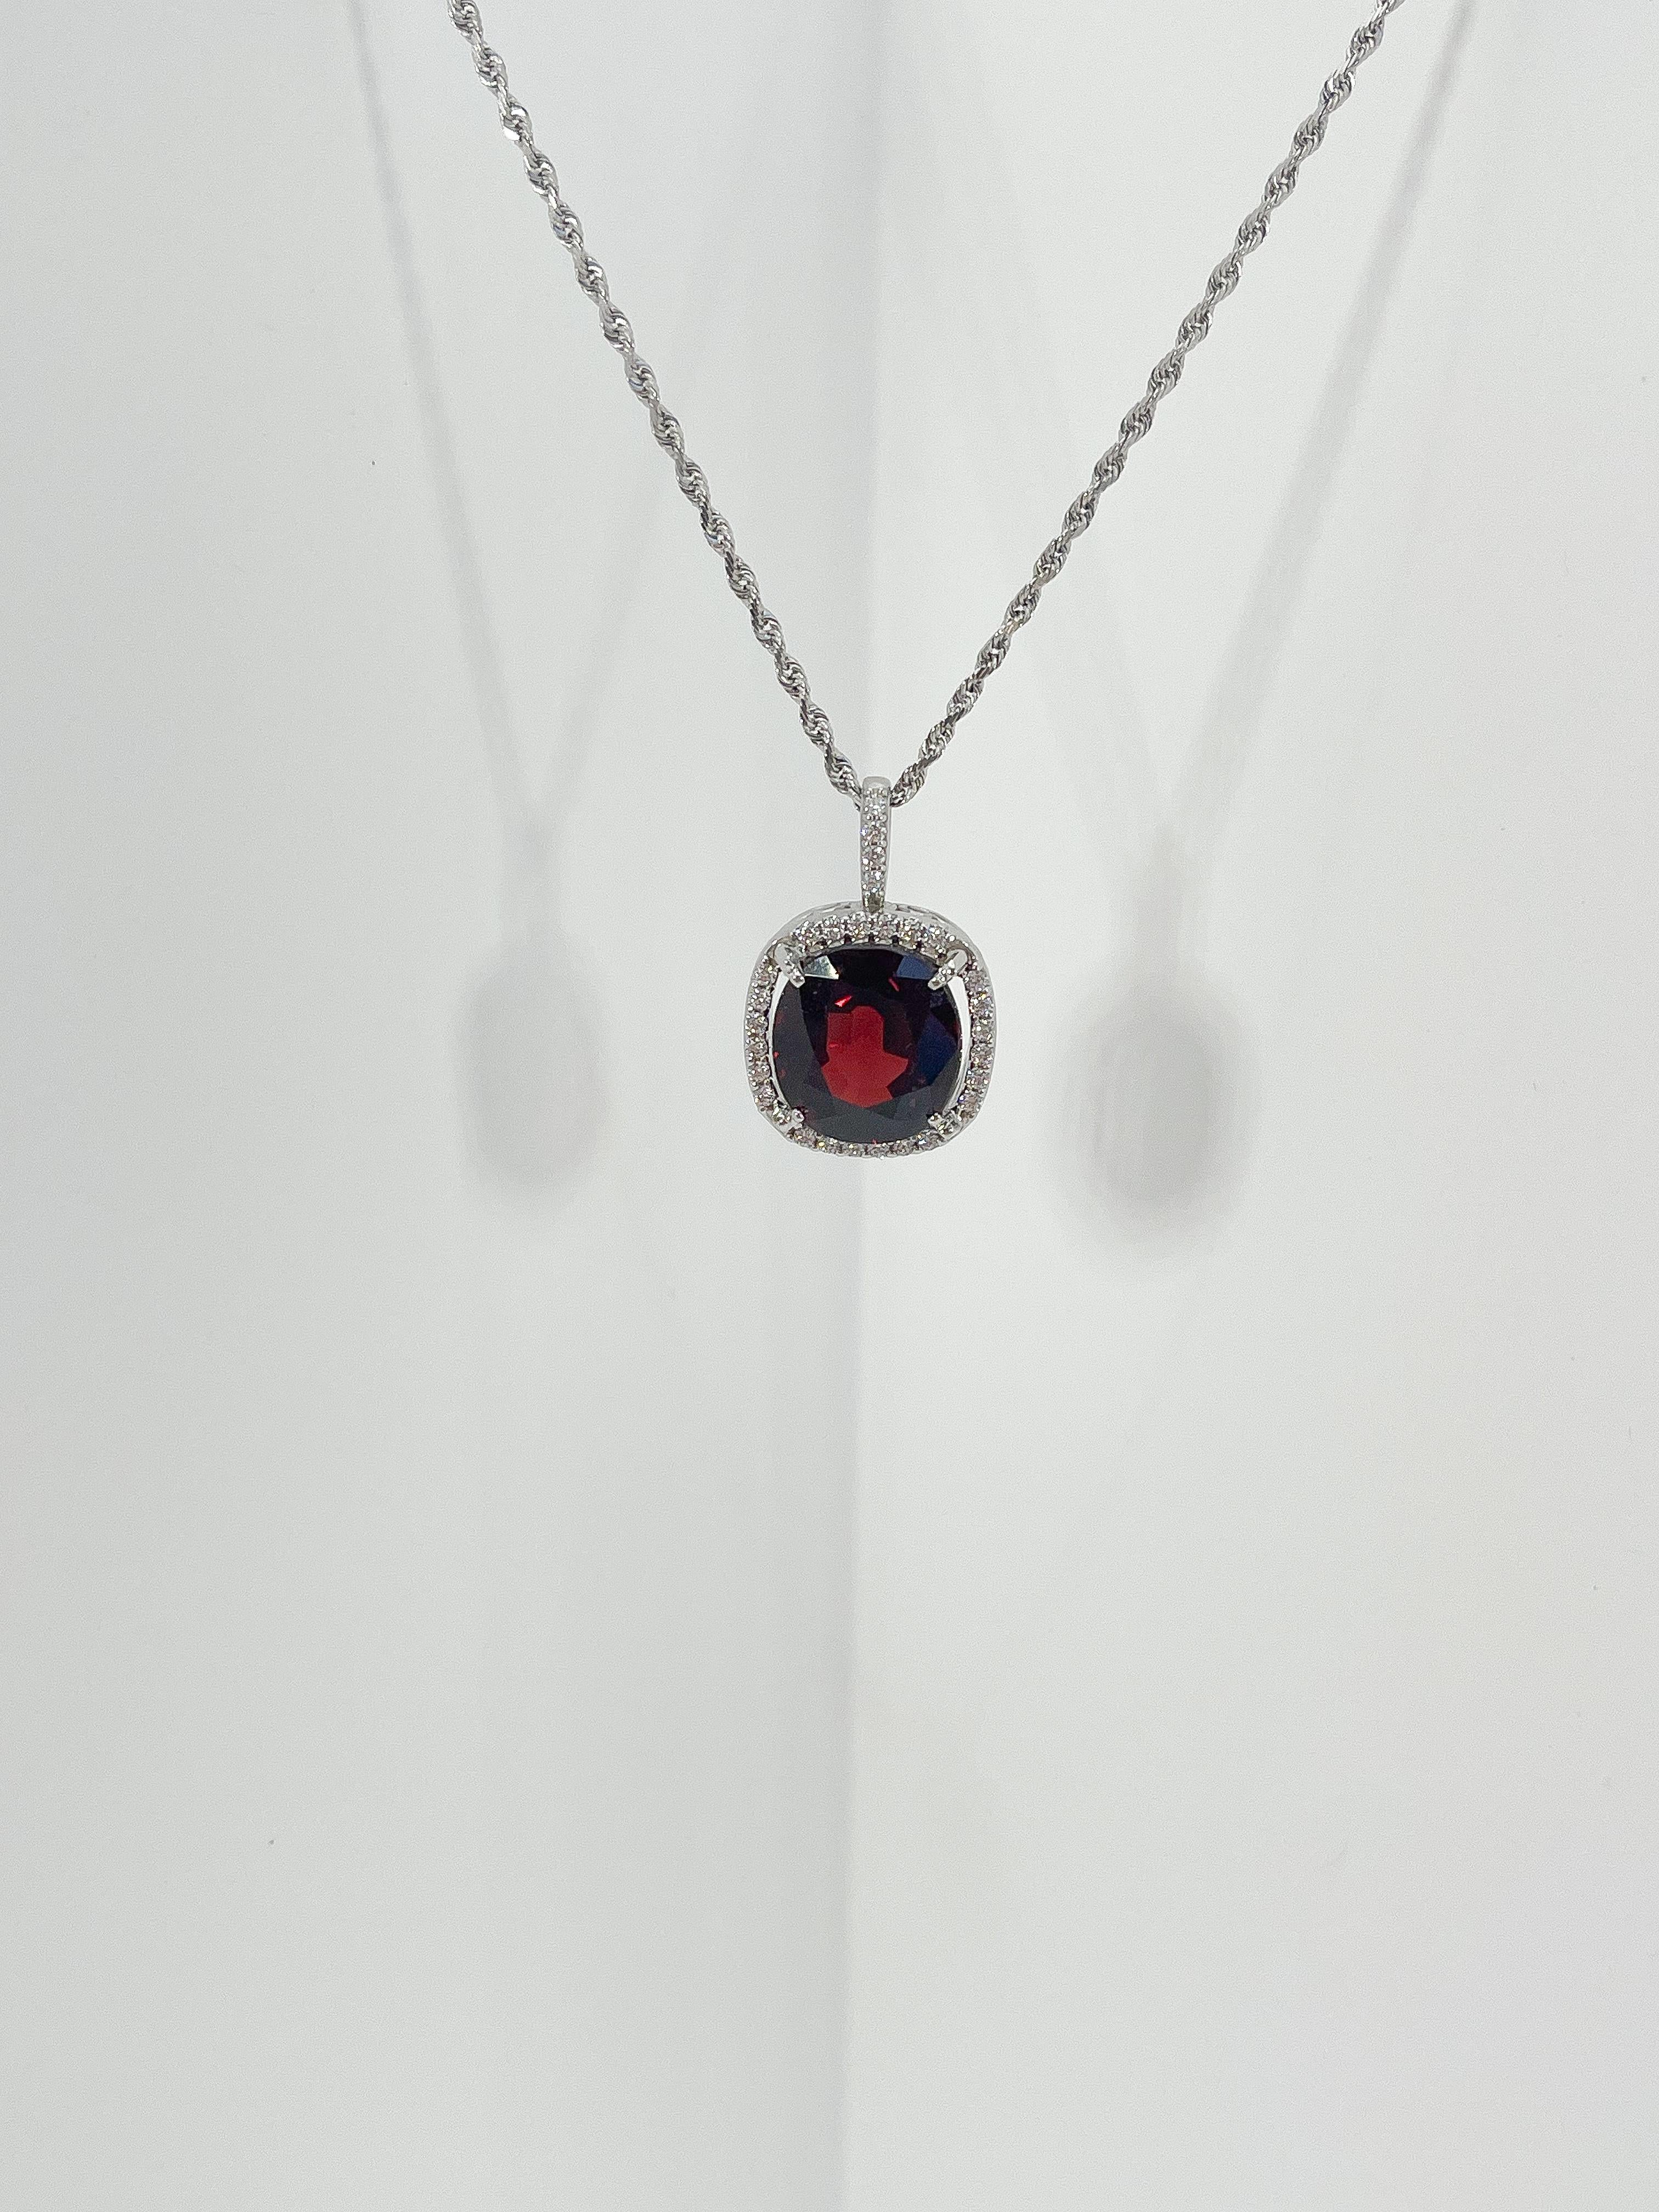 14k white gold garnet and .33 CTW diamond halo pendant necklace. The garnet is cushion shaped and measures to be 10.7mm x 10.7mm, the diamonds in the halo and the bail are all round, pendant comes on an 18 inch diamond cut rope chain, and the